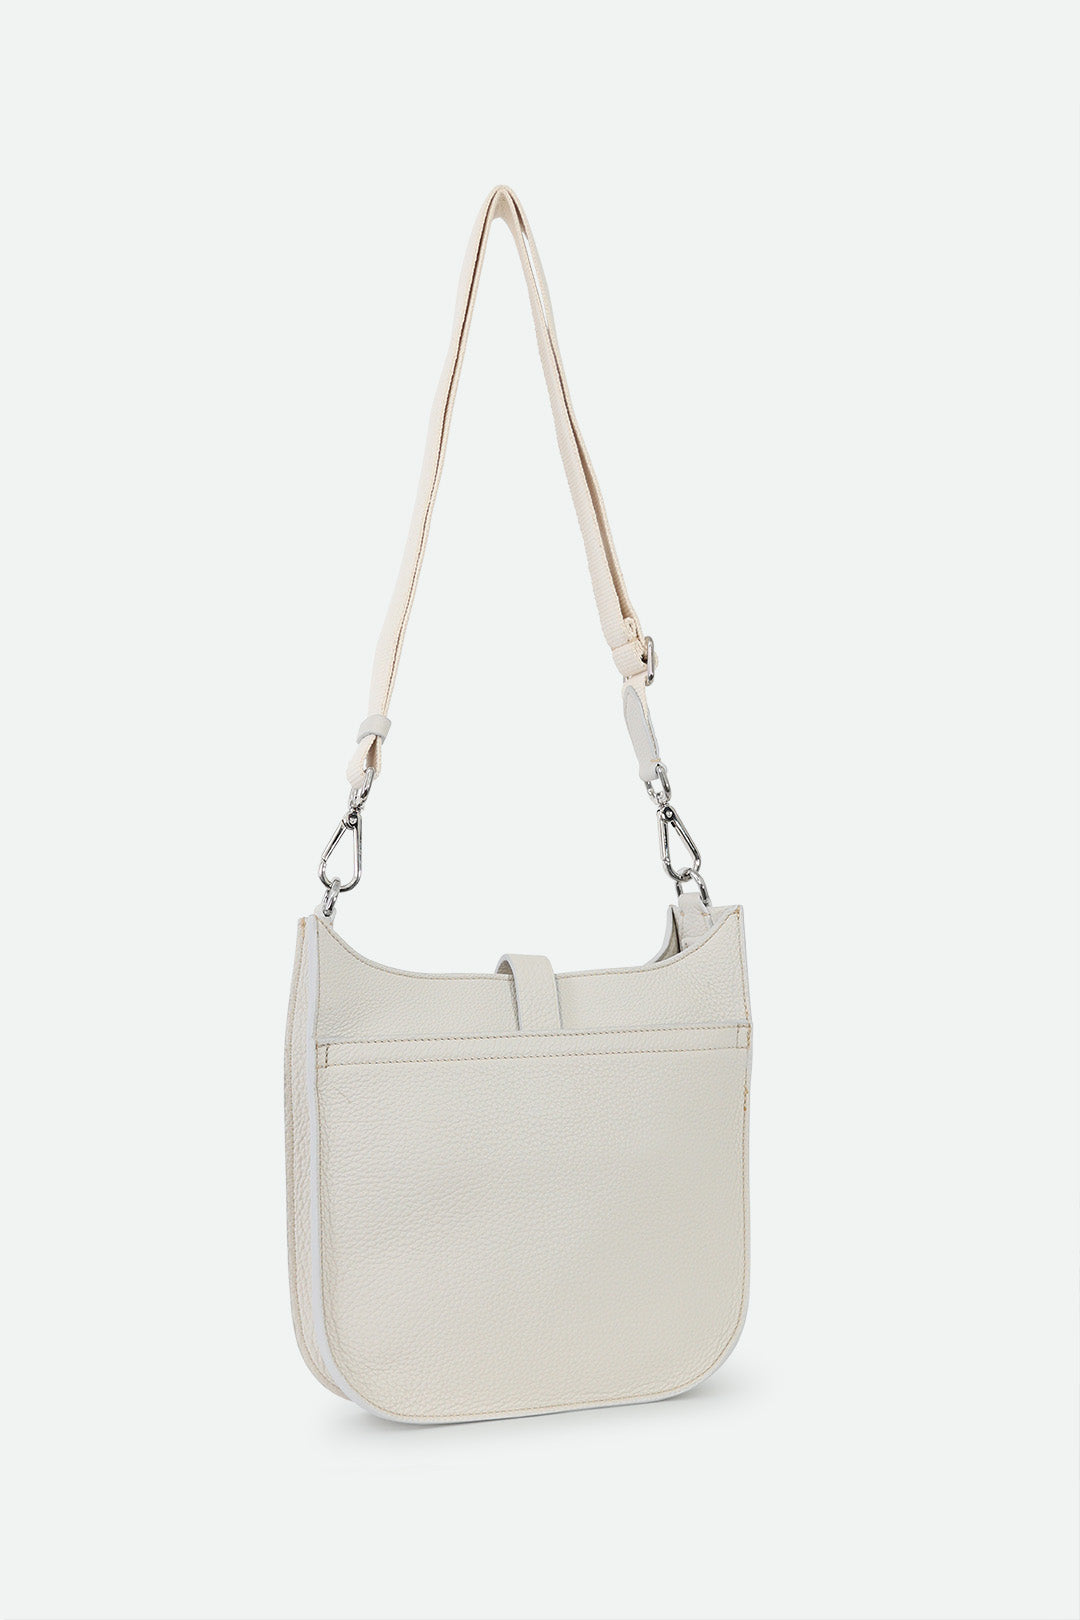 GIA ITALIAN LEATHER CROSSBODY BAG IN BUTTER WHITE - PRE-ORDER NOW